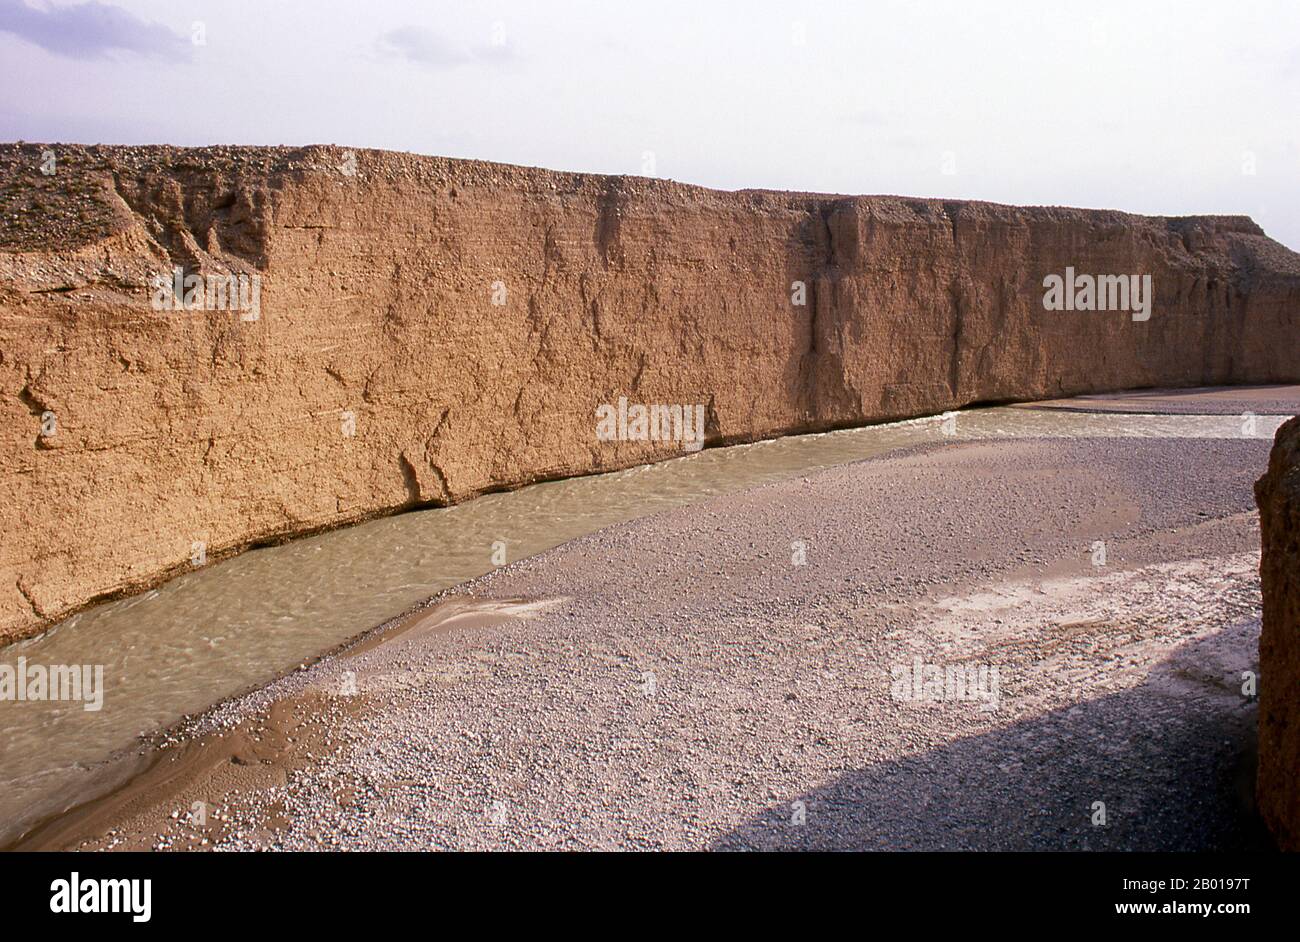 China: The Taolai River Gorge marking the end of the Ming Great Wall near Jiayuguan Fort.  Jiayuguan, the ‘First and Greatest Pass under Heaven’, was completed in 1372 on the orders of Zhu Yuanzhang, the first Ming Emperor (1368-1398), to mark the end of the Ming Great Wall. It was also the very limits of Chinese civilisation, and the beginnings of the outer ‘barbarian’ lands.  For centuries the fort was not just of strategic importance to Han Chinese, but of cultural significance as well. This was the last civilised place before the outer darkness. Stock Photo